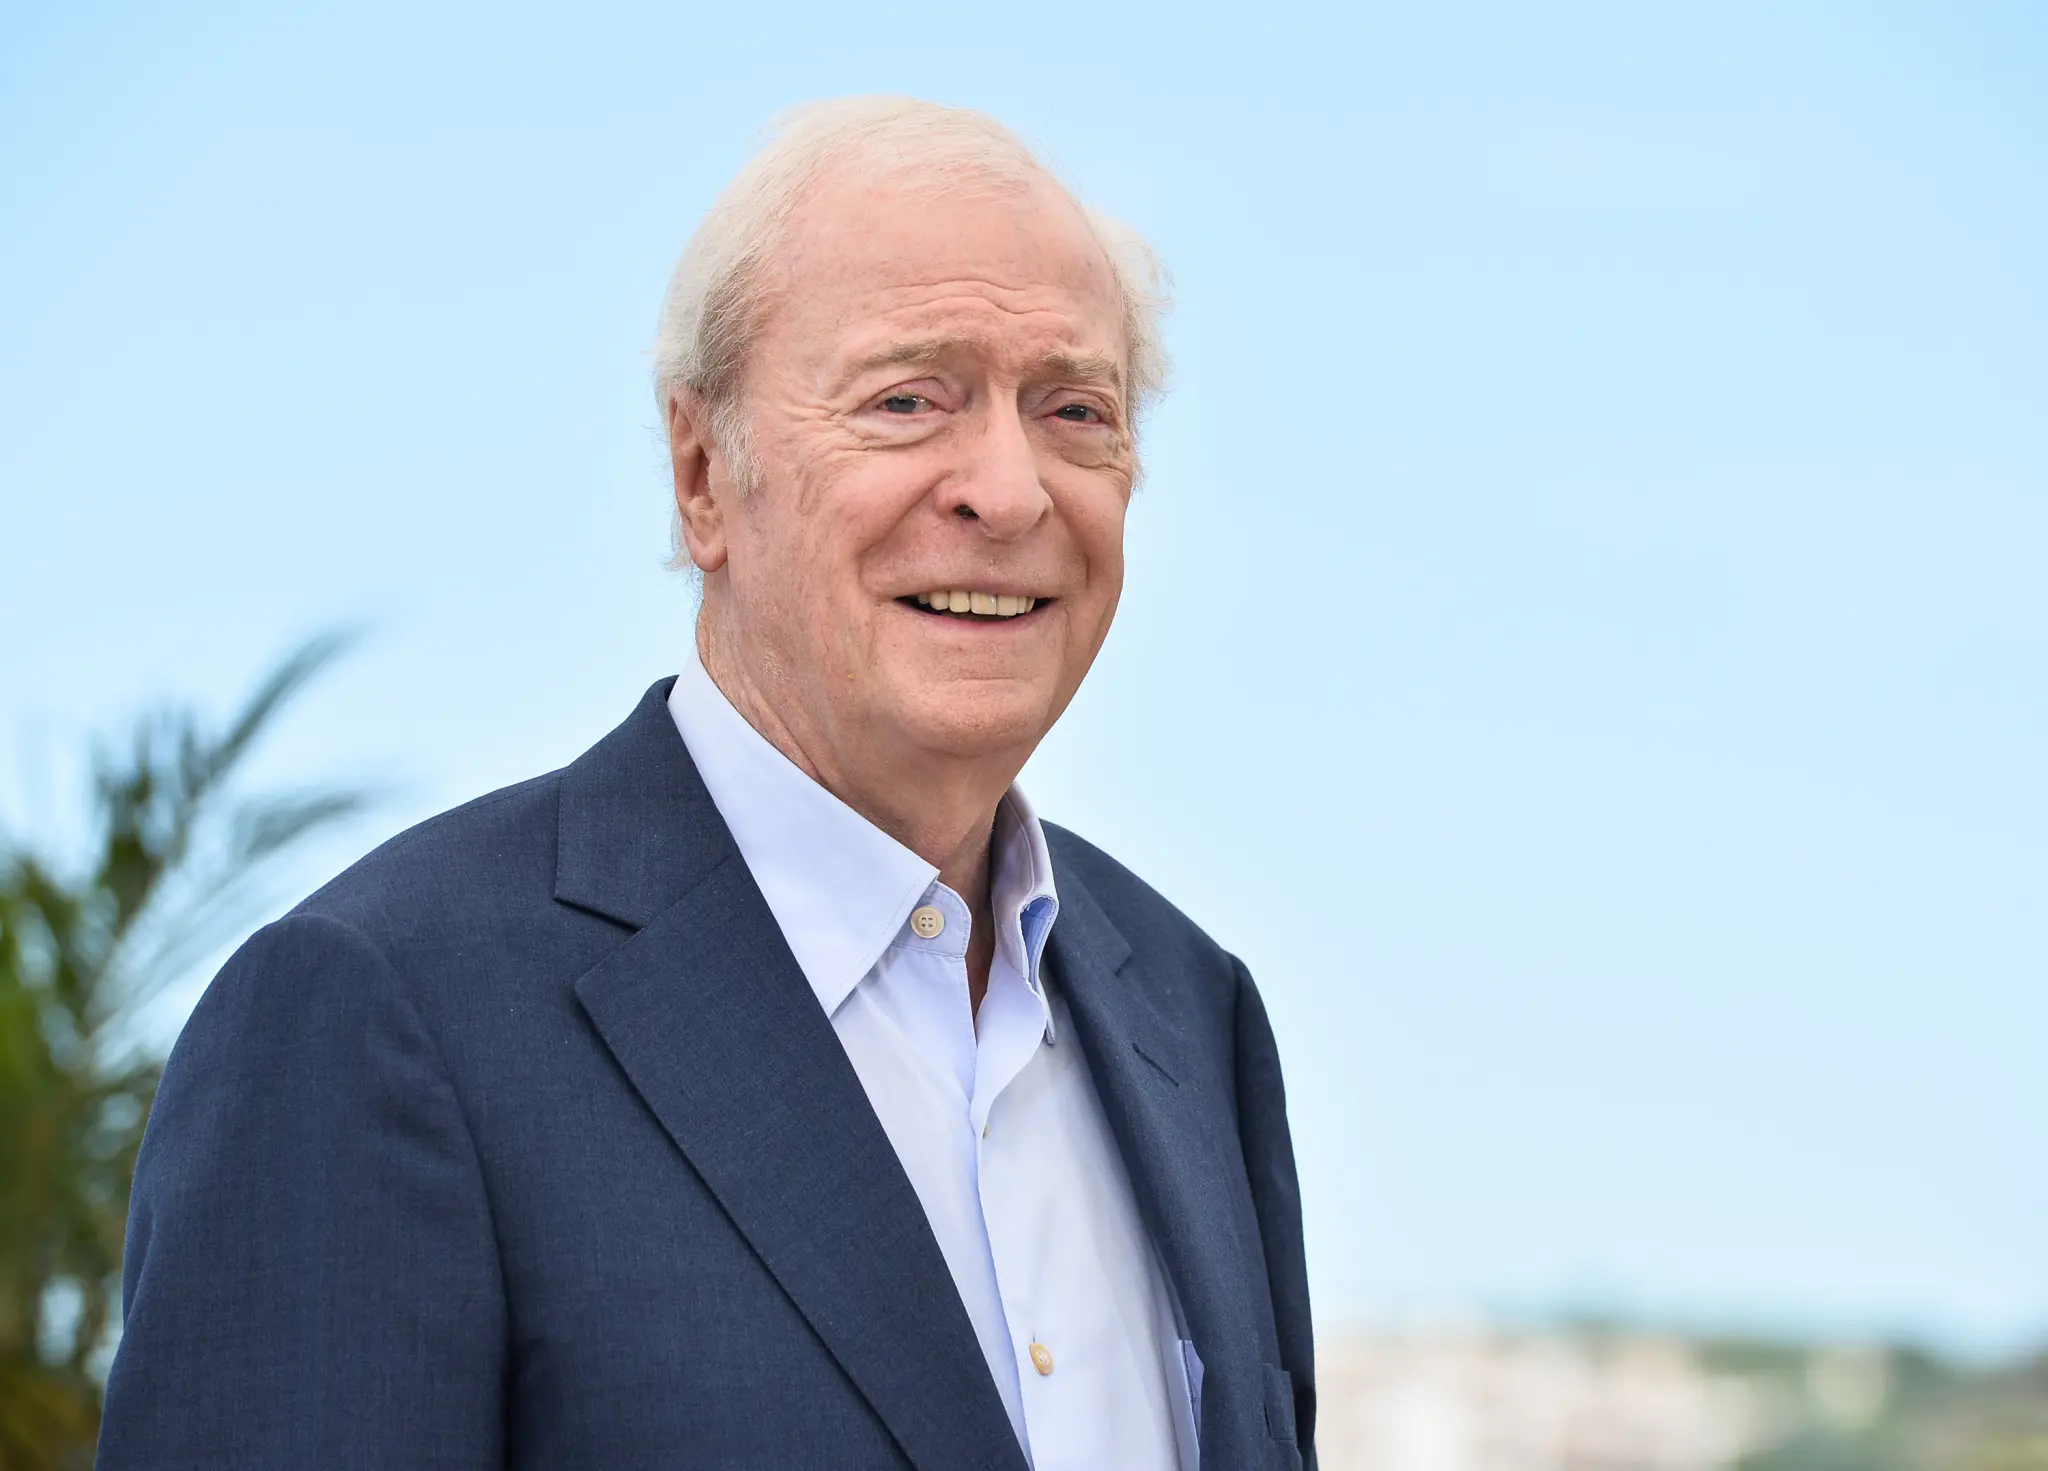 Sir Michael Caine Announces Retirement From Film Acting: ‘You Don’t Have Leading Men at 90’